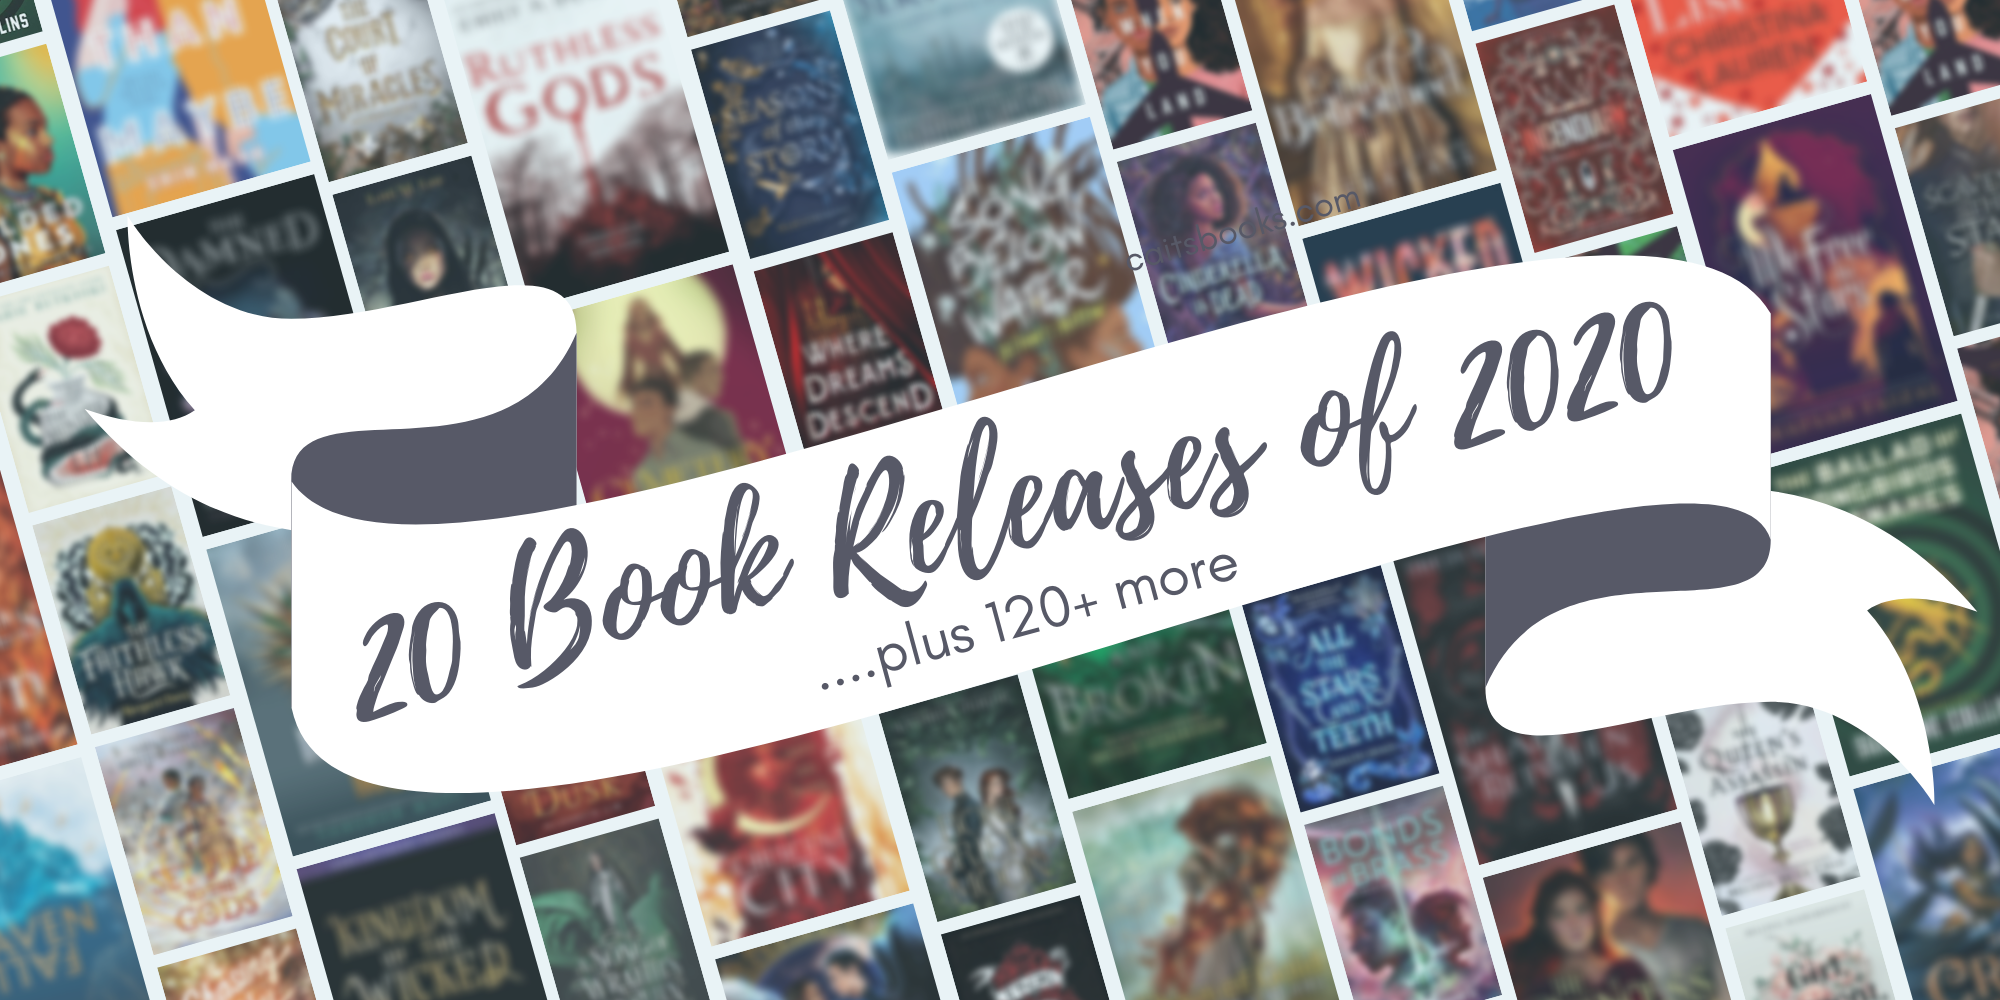 20 Book Releases of 2020